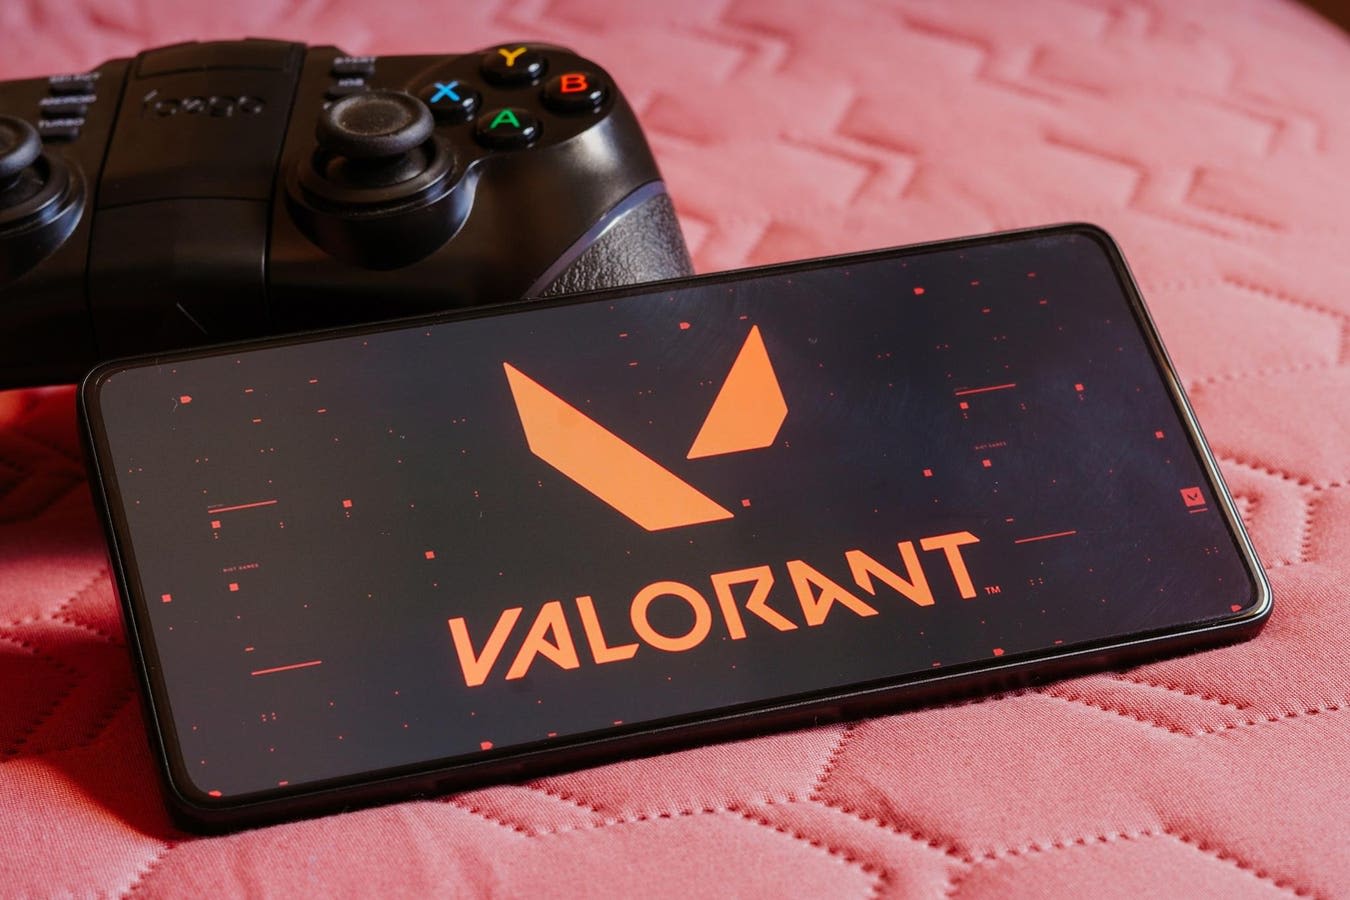 ‘Valorant’ Mobile Could Release This Weekend After China Approval